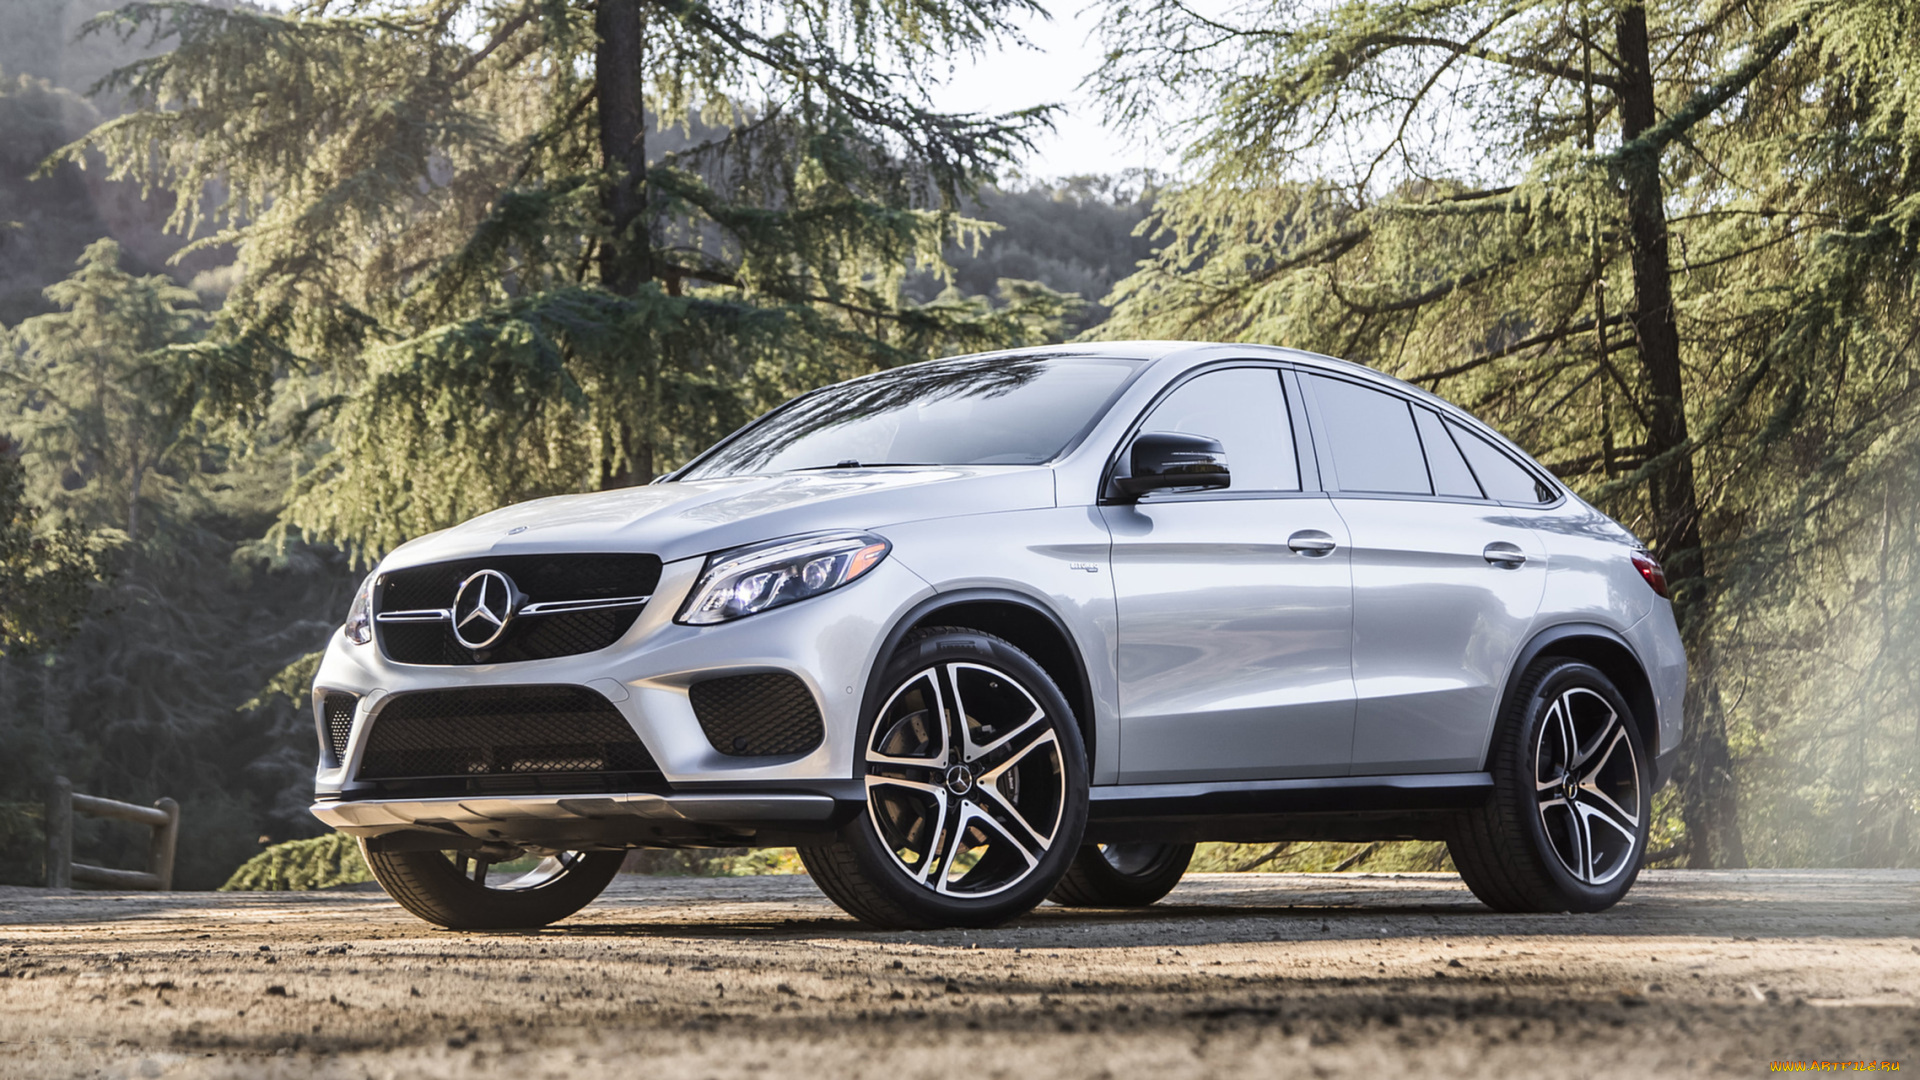 mercedes-benz, amg, gle-43, coupe, 2017, автомобили, mercedes-benz, 2017, coupe, gle-43, amg